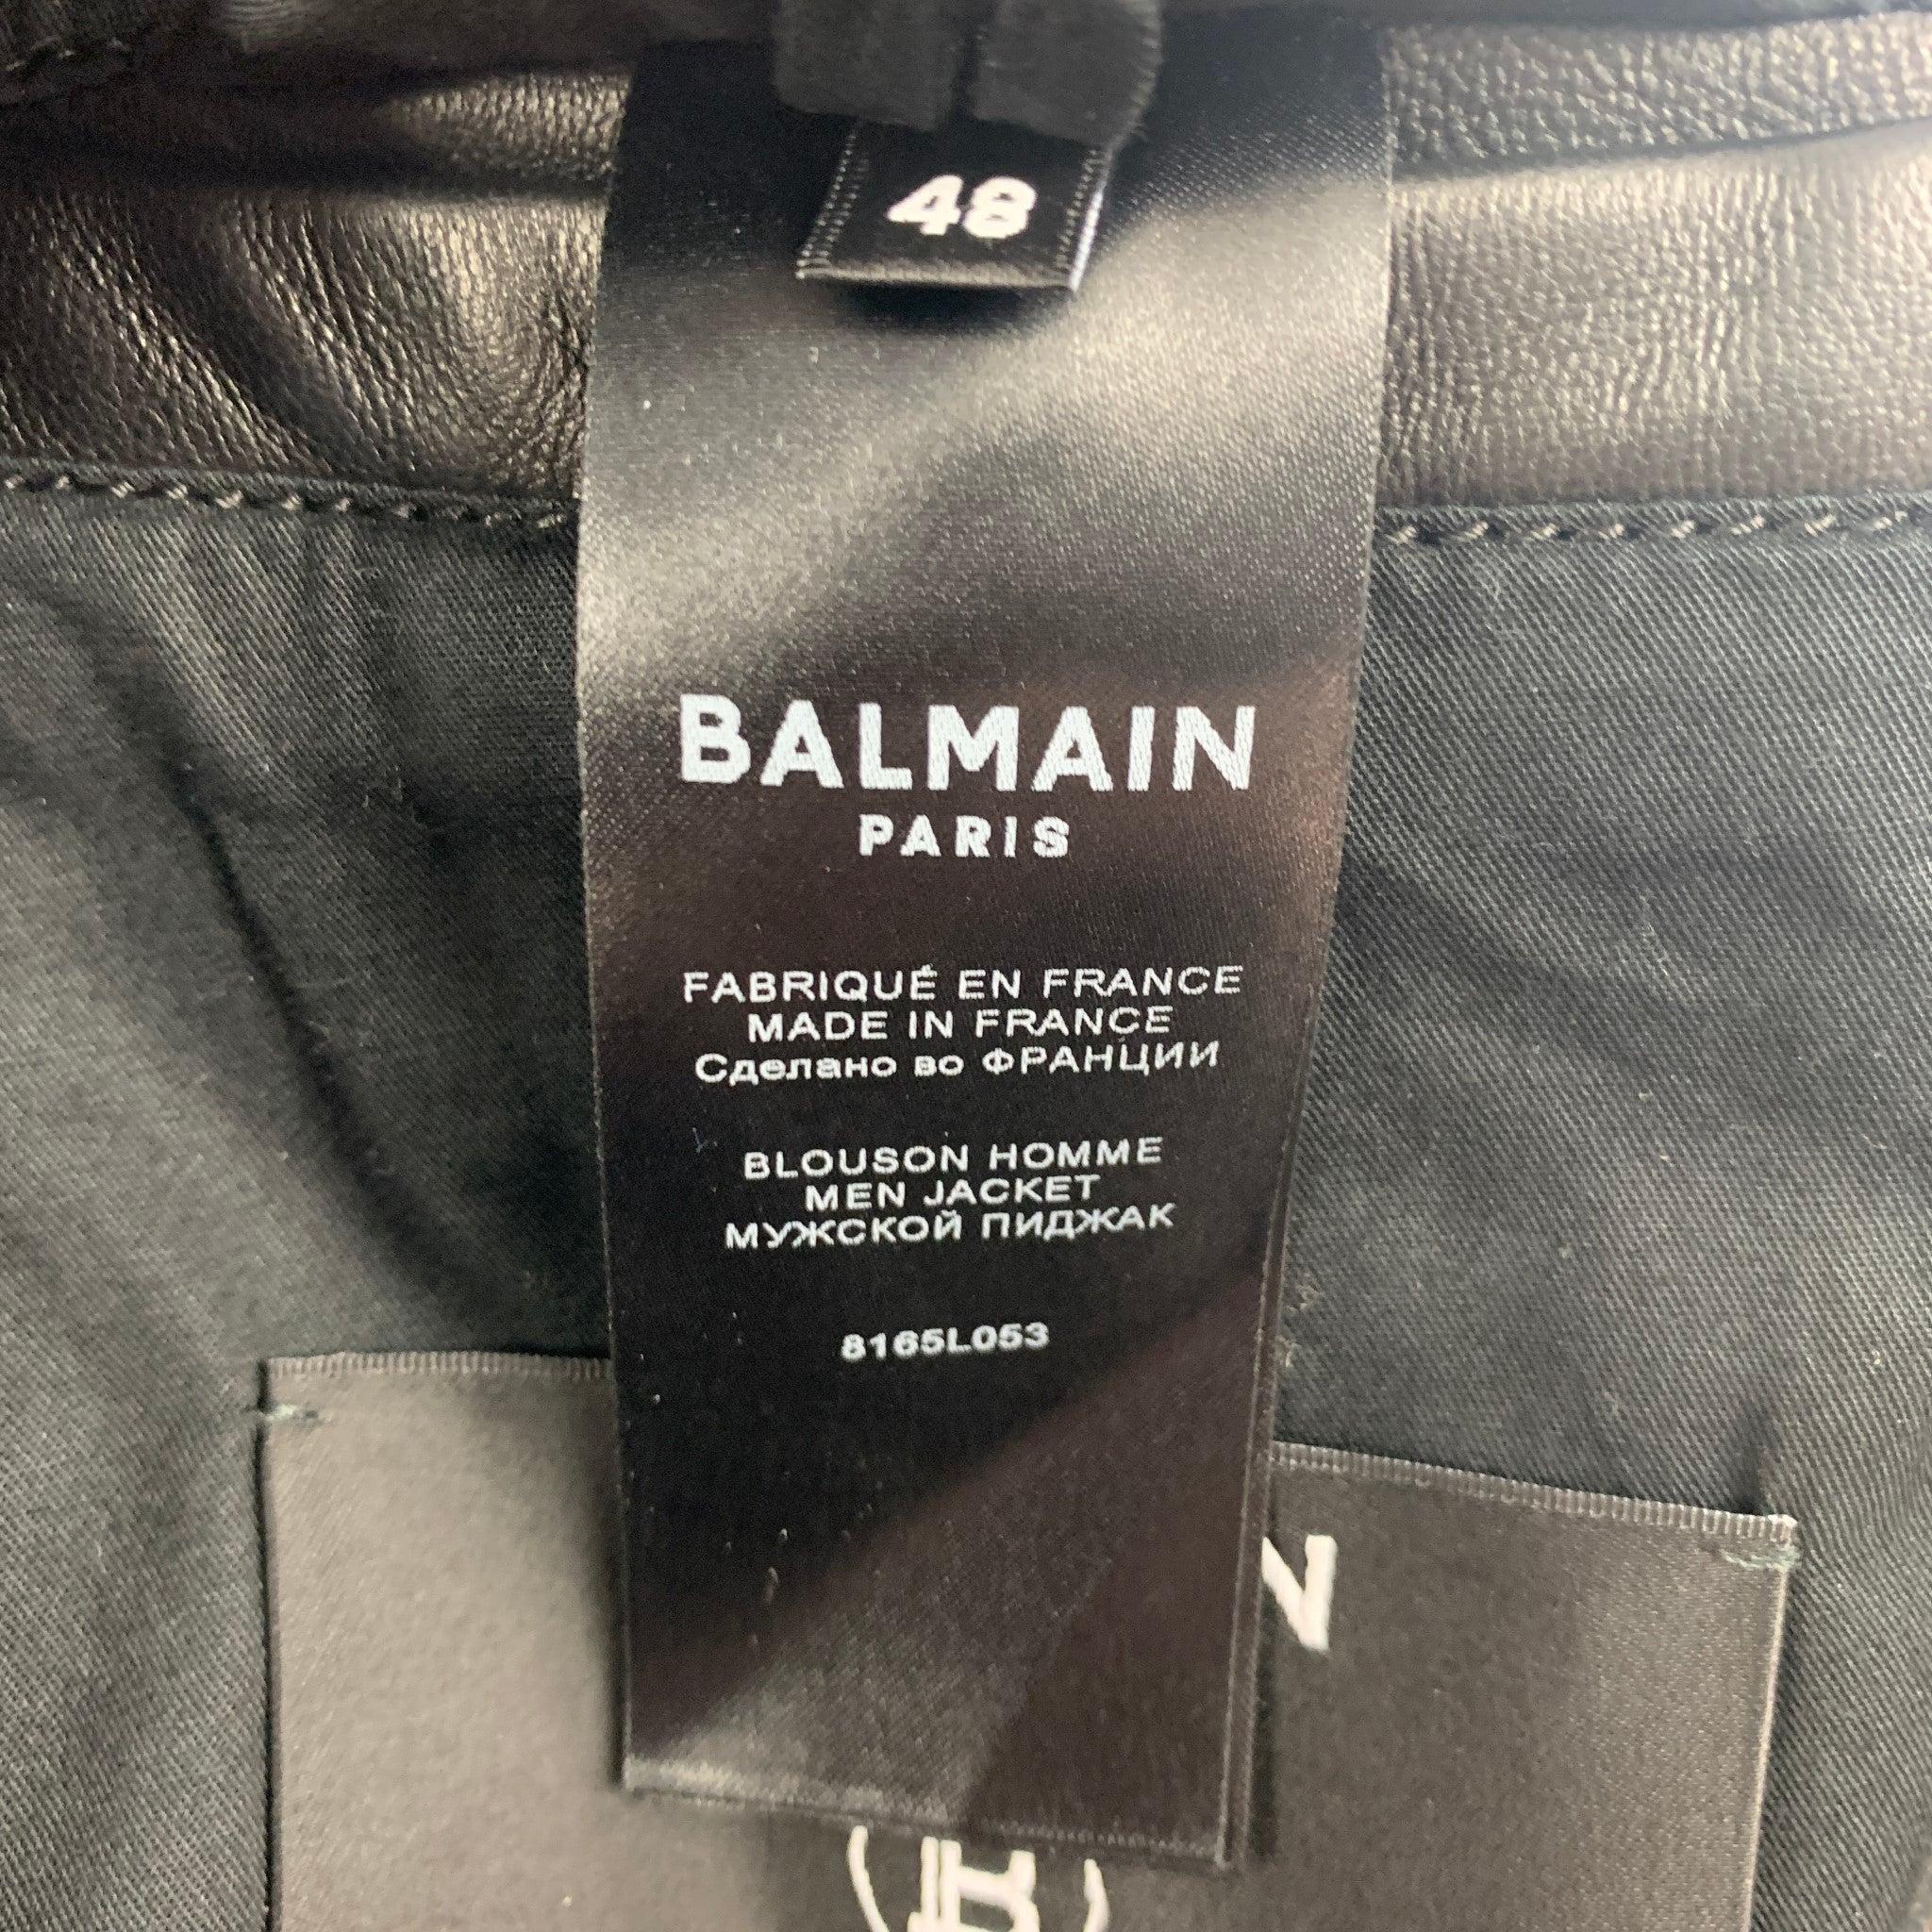 BALMAIN By Olivier Rousteing Size 38 Black Leather Motorcycle Jacket For Sale 1